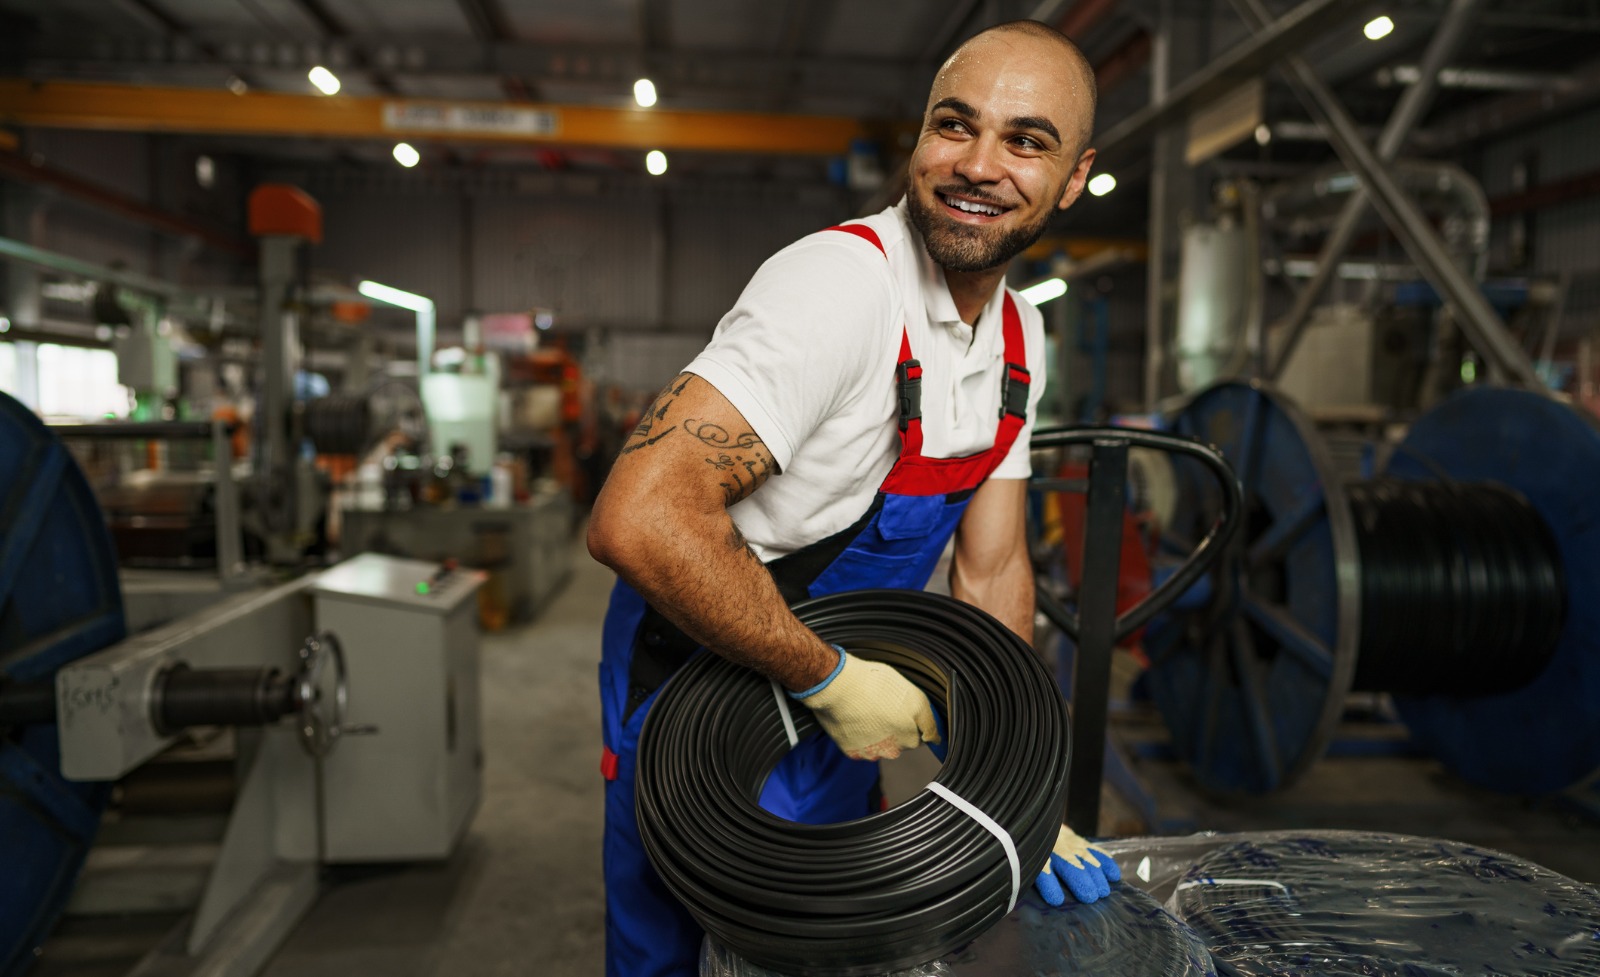 A smiling employee holding equipment on a shop floor.